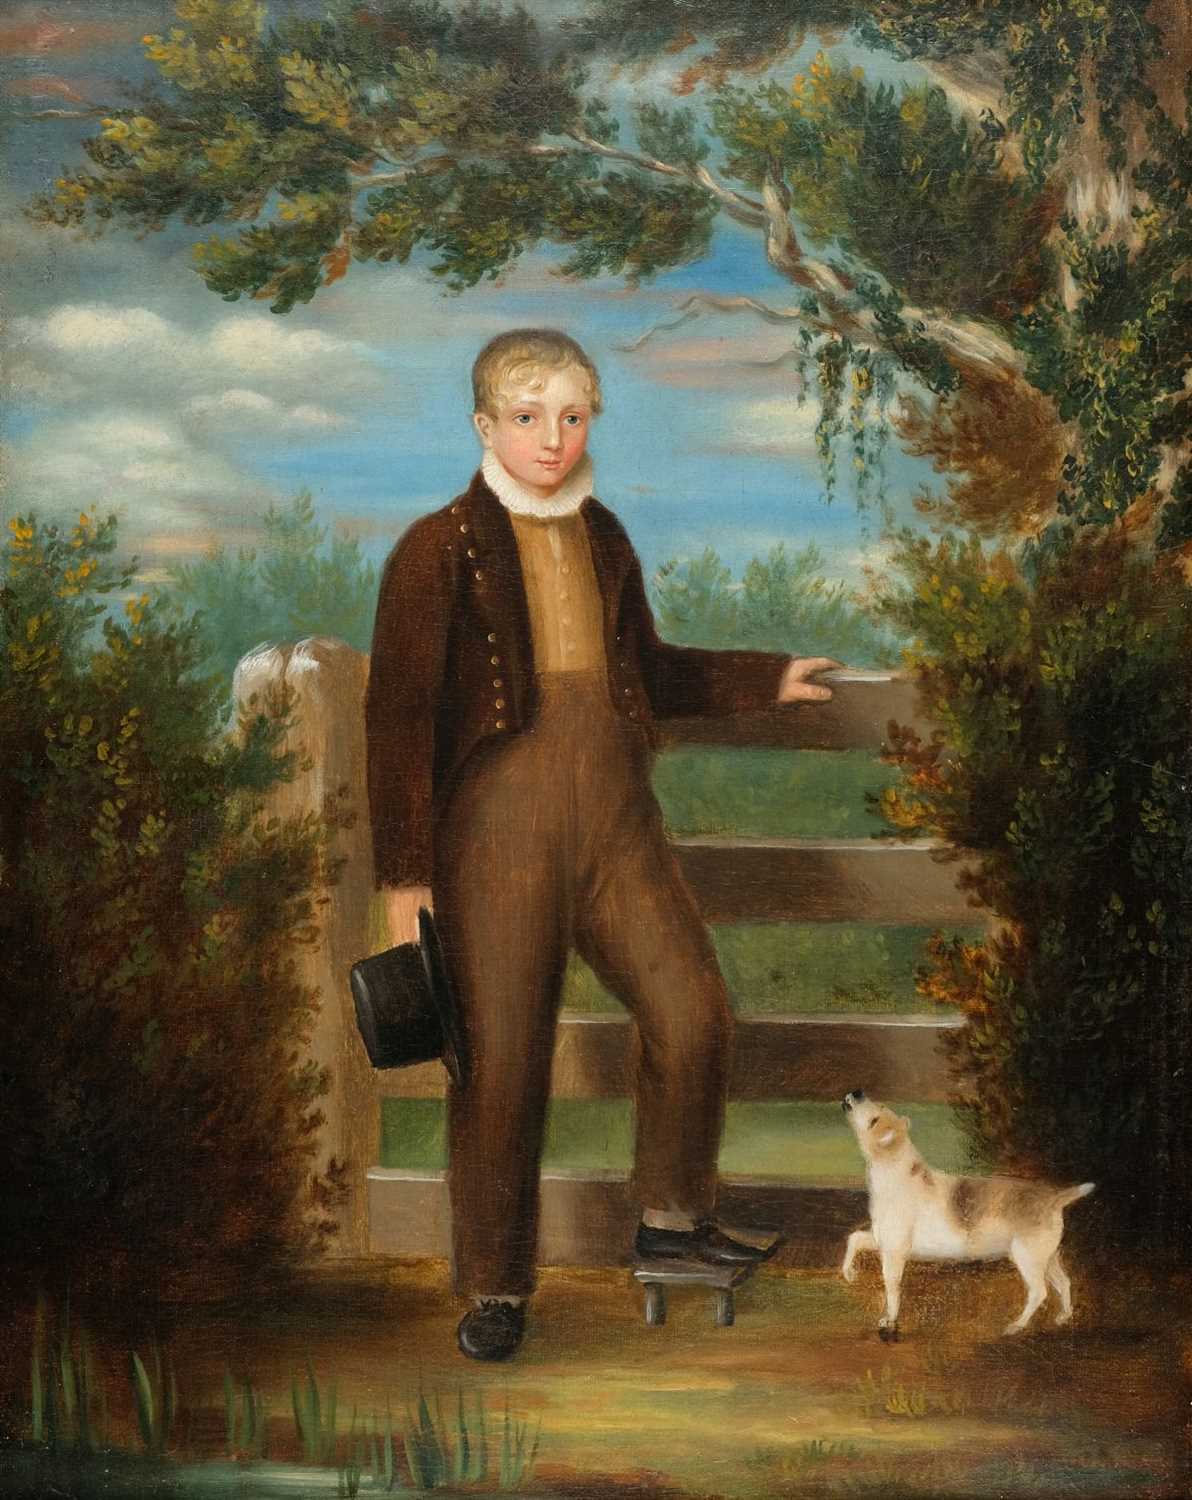 Lot 421 - Naive School. Regency portrait of a young boy beside a stile with a dog, circa 1820